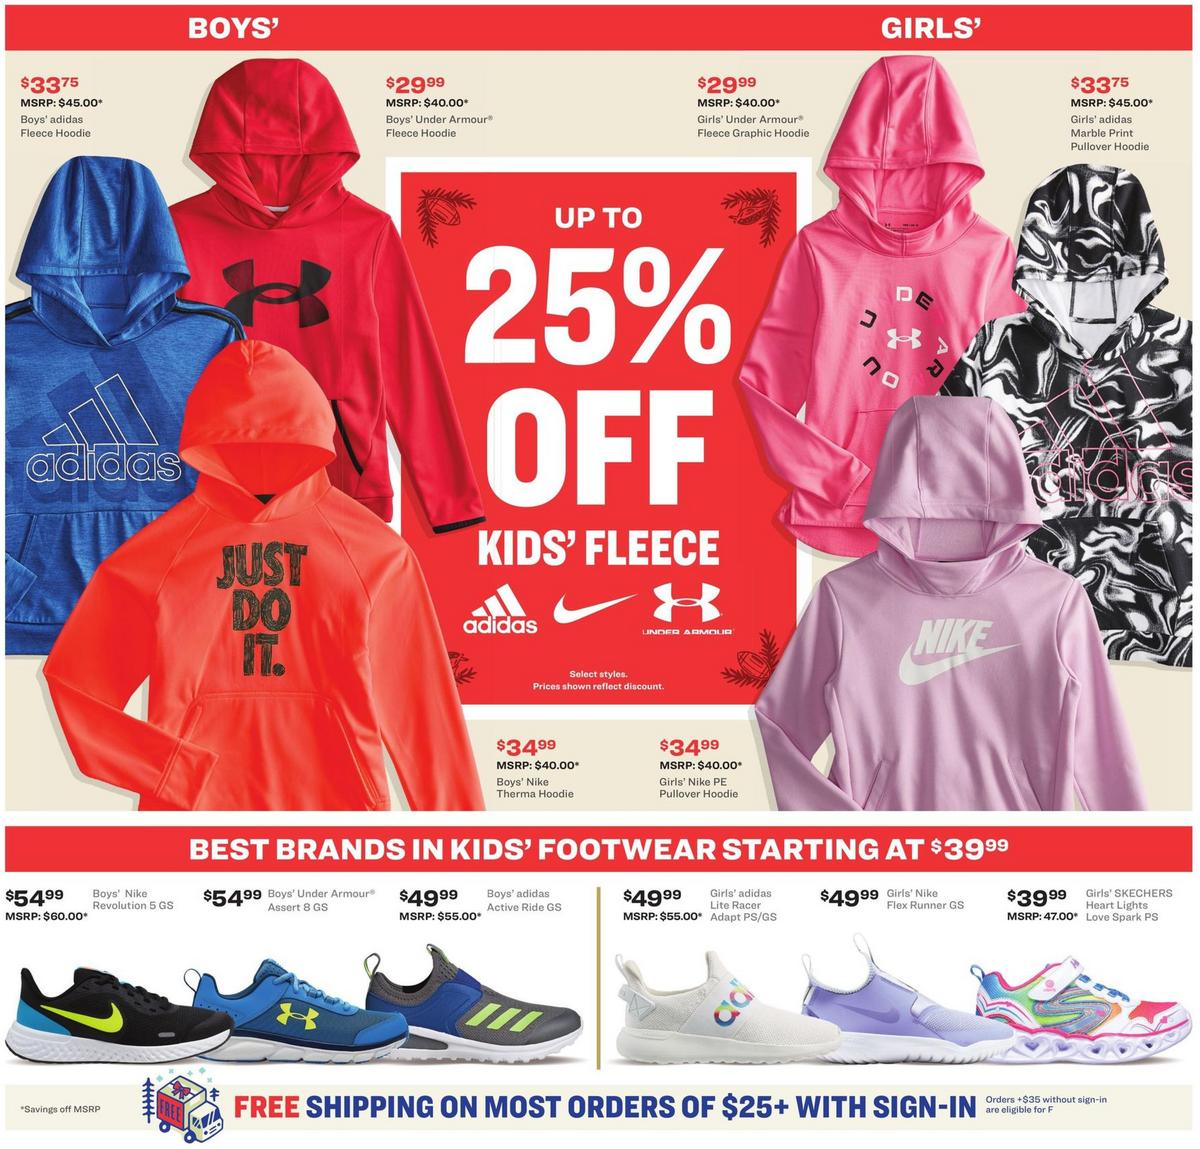 Academy Sports + Outdoors Weekly Ad from December 7